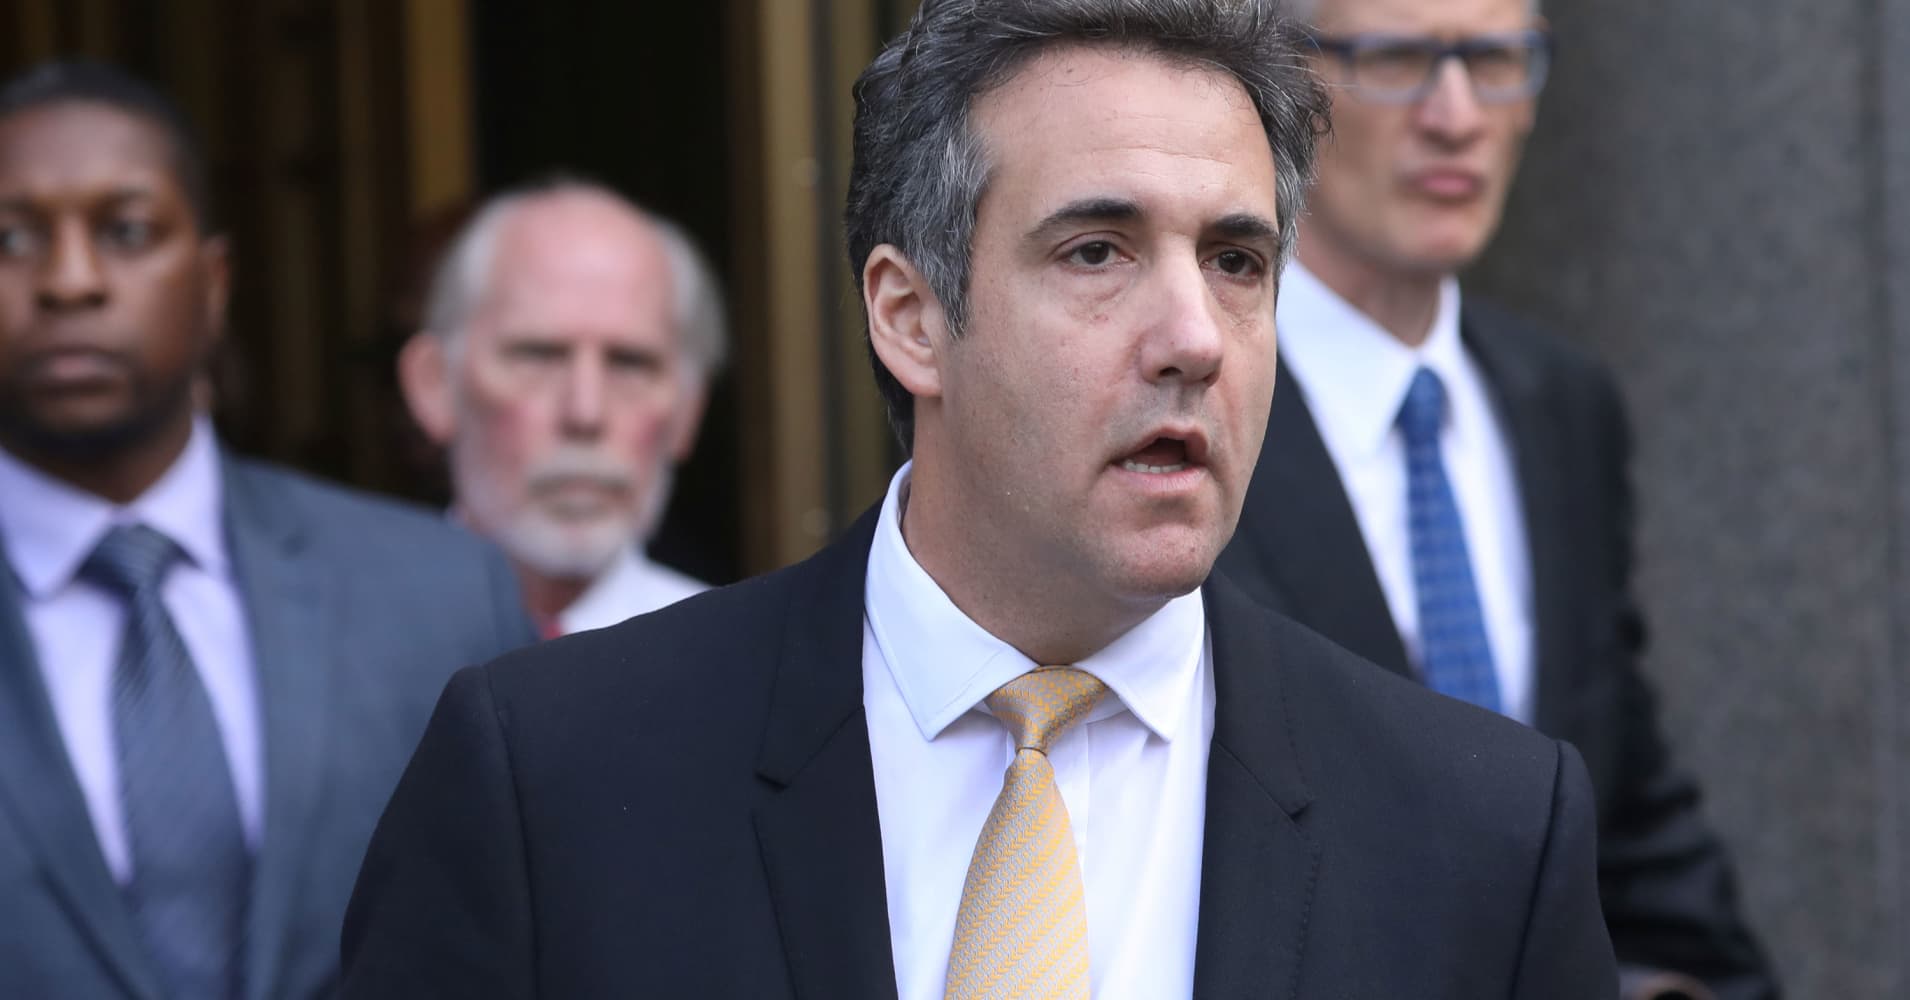 Michael Cohen: Trump said 'black people are too stupid to vote for me'